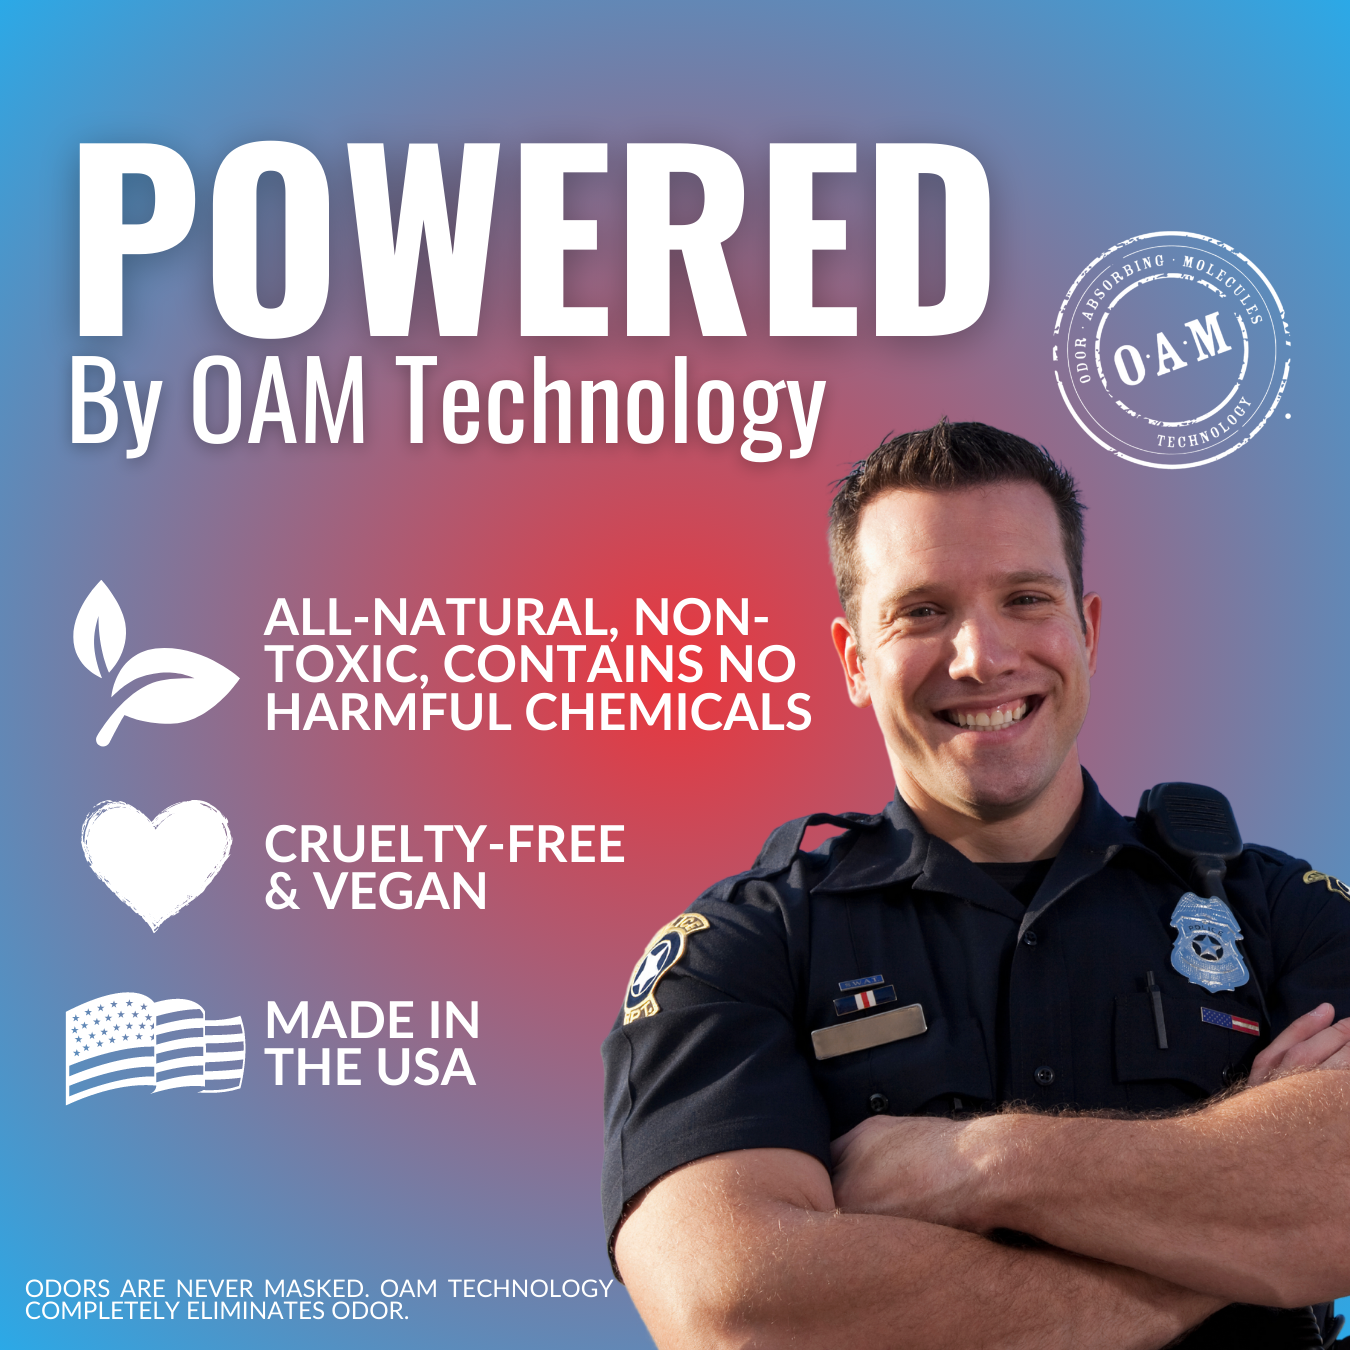 Natural Laundry Booster for Law Enforcement, Police Officers, & First Responders. Removes sweat and other foul odors from bulletproof vest, tactical gear, duty belts, boots, and more. Safe, non-toxic, enzyme-free formula.